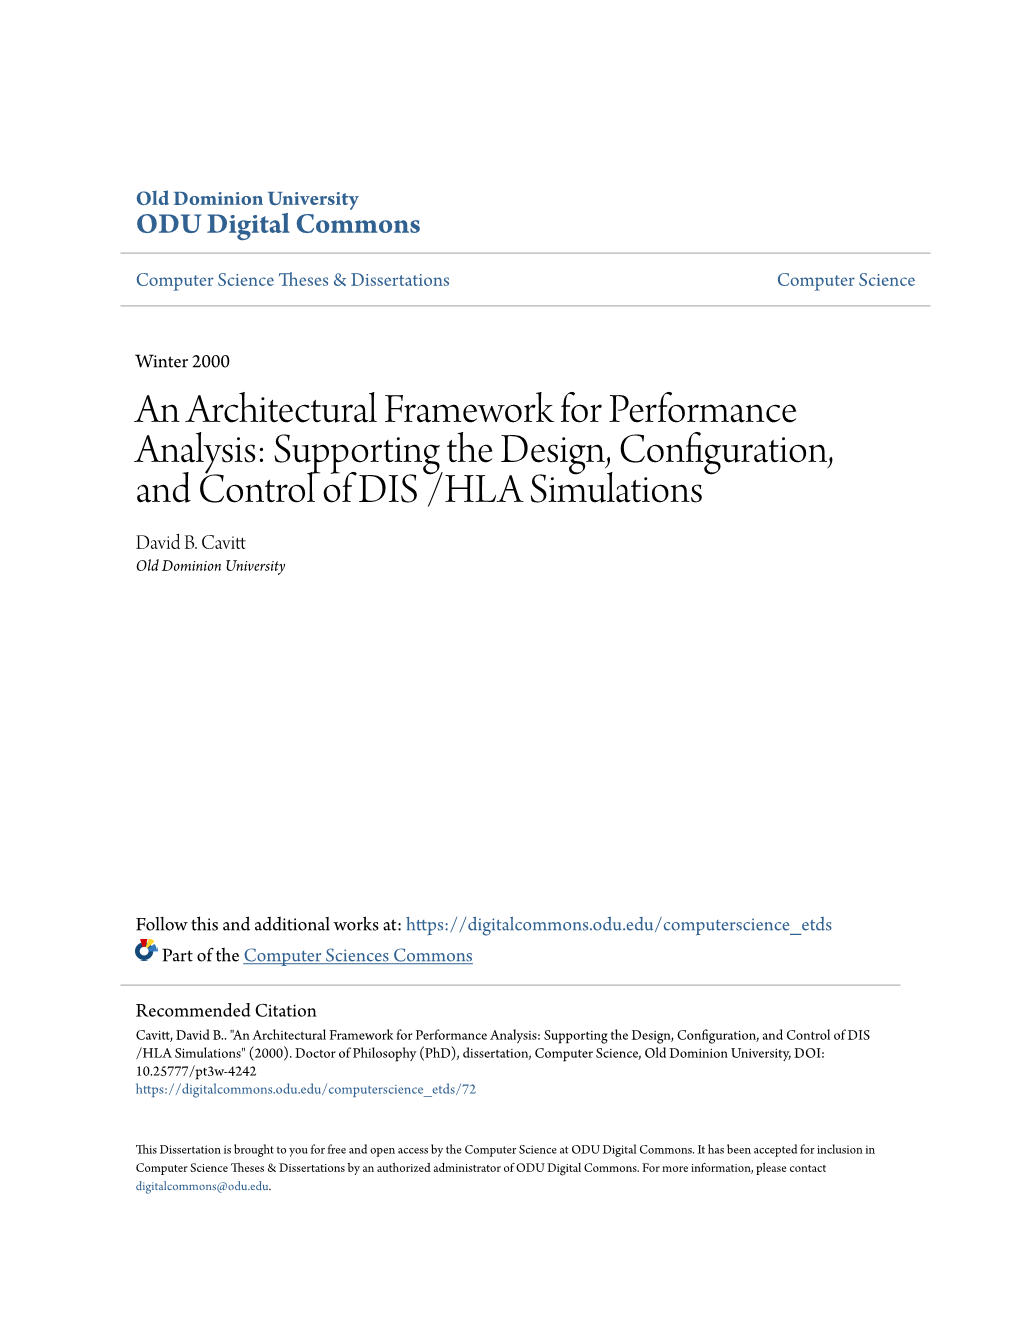 An Architectural Framework for Performance Analysis: Supporting the Design, Configuration, and Control of DIS /HLA Simulations David B